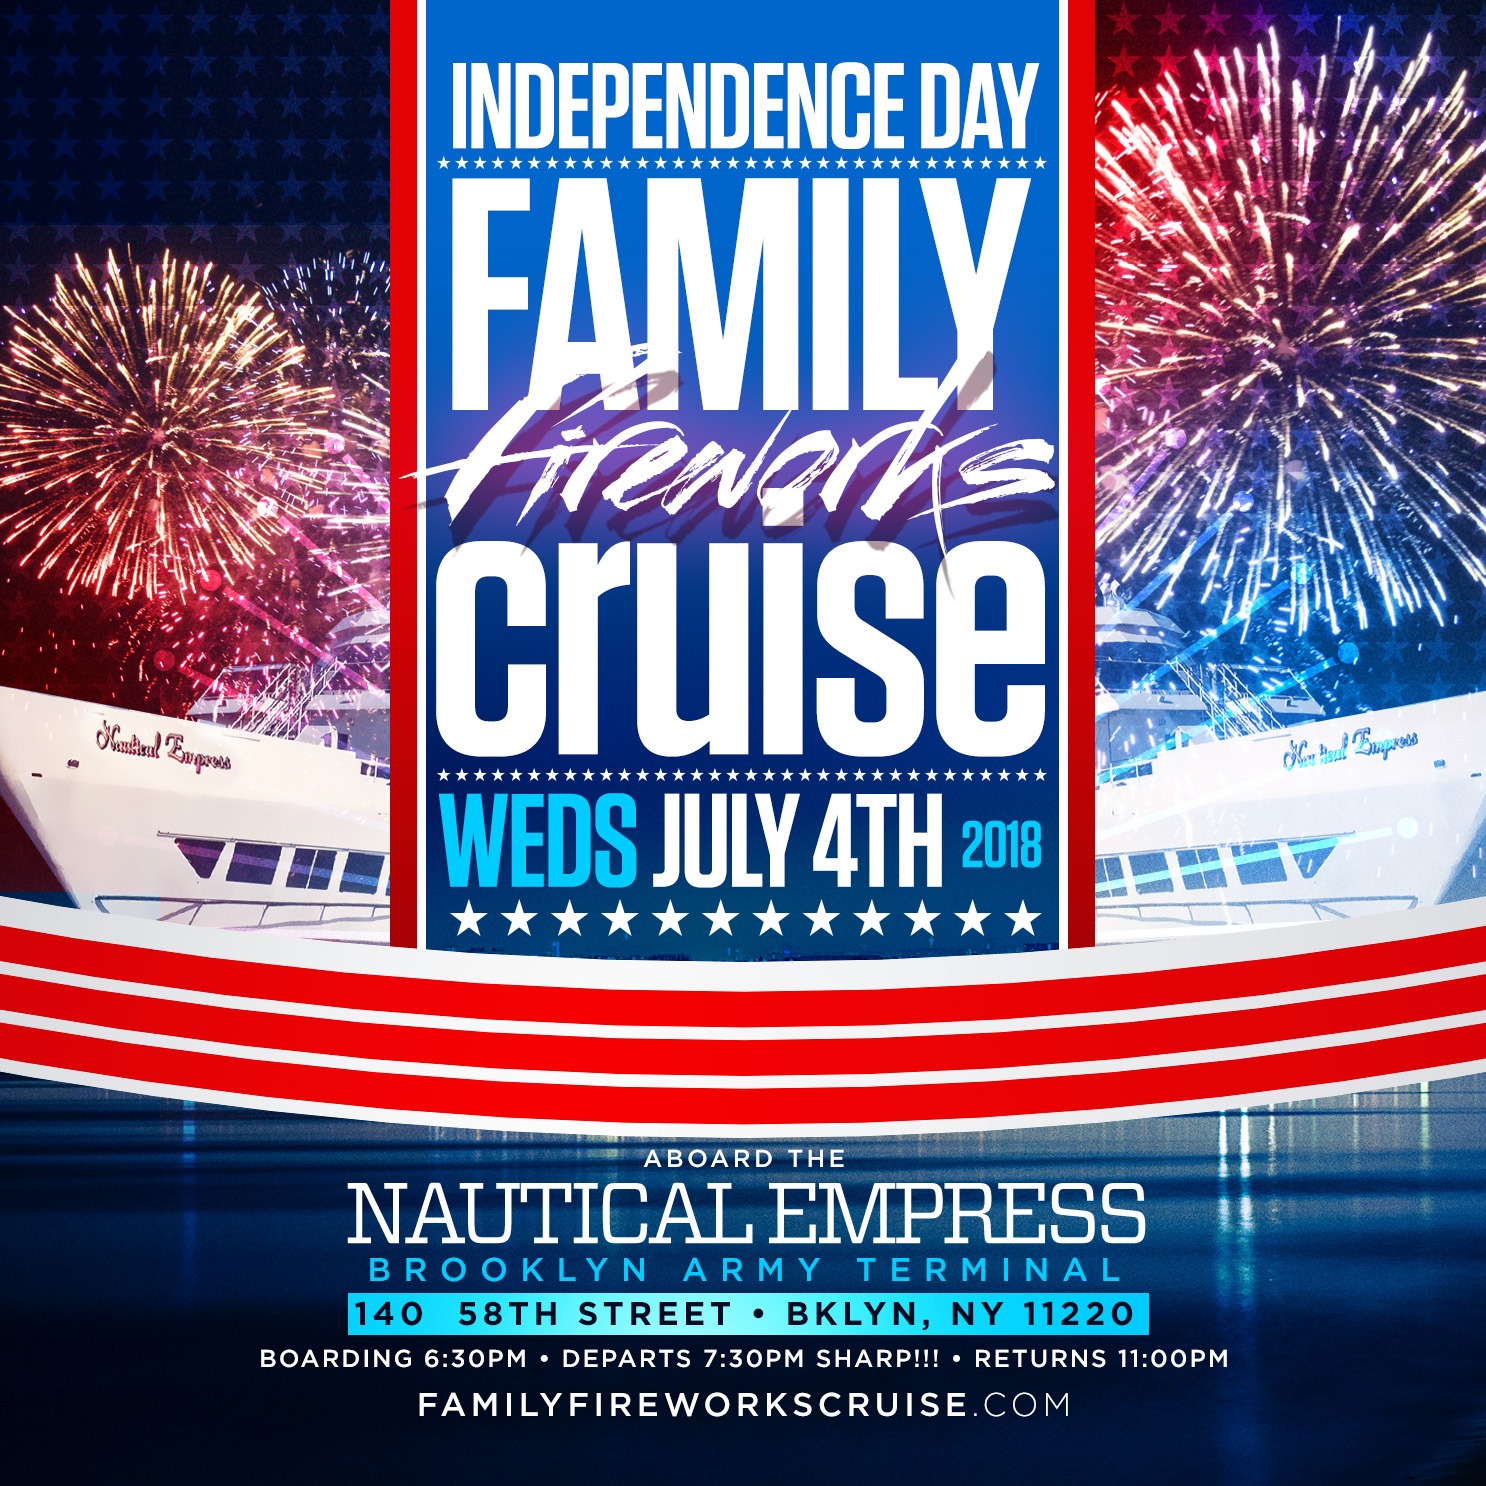 4th of JULY INDEPENDENCE DAY 2018 FAMILY FIREWORKS CRUISE • BROOKLYN, NEW YORK